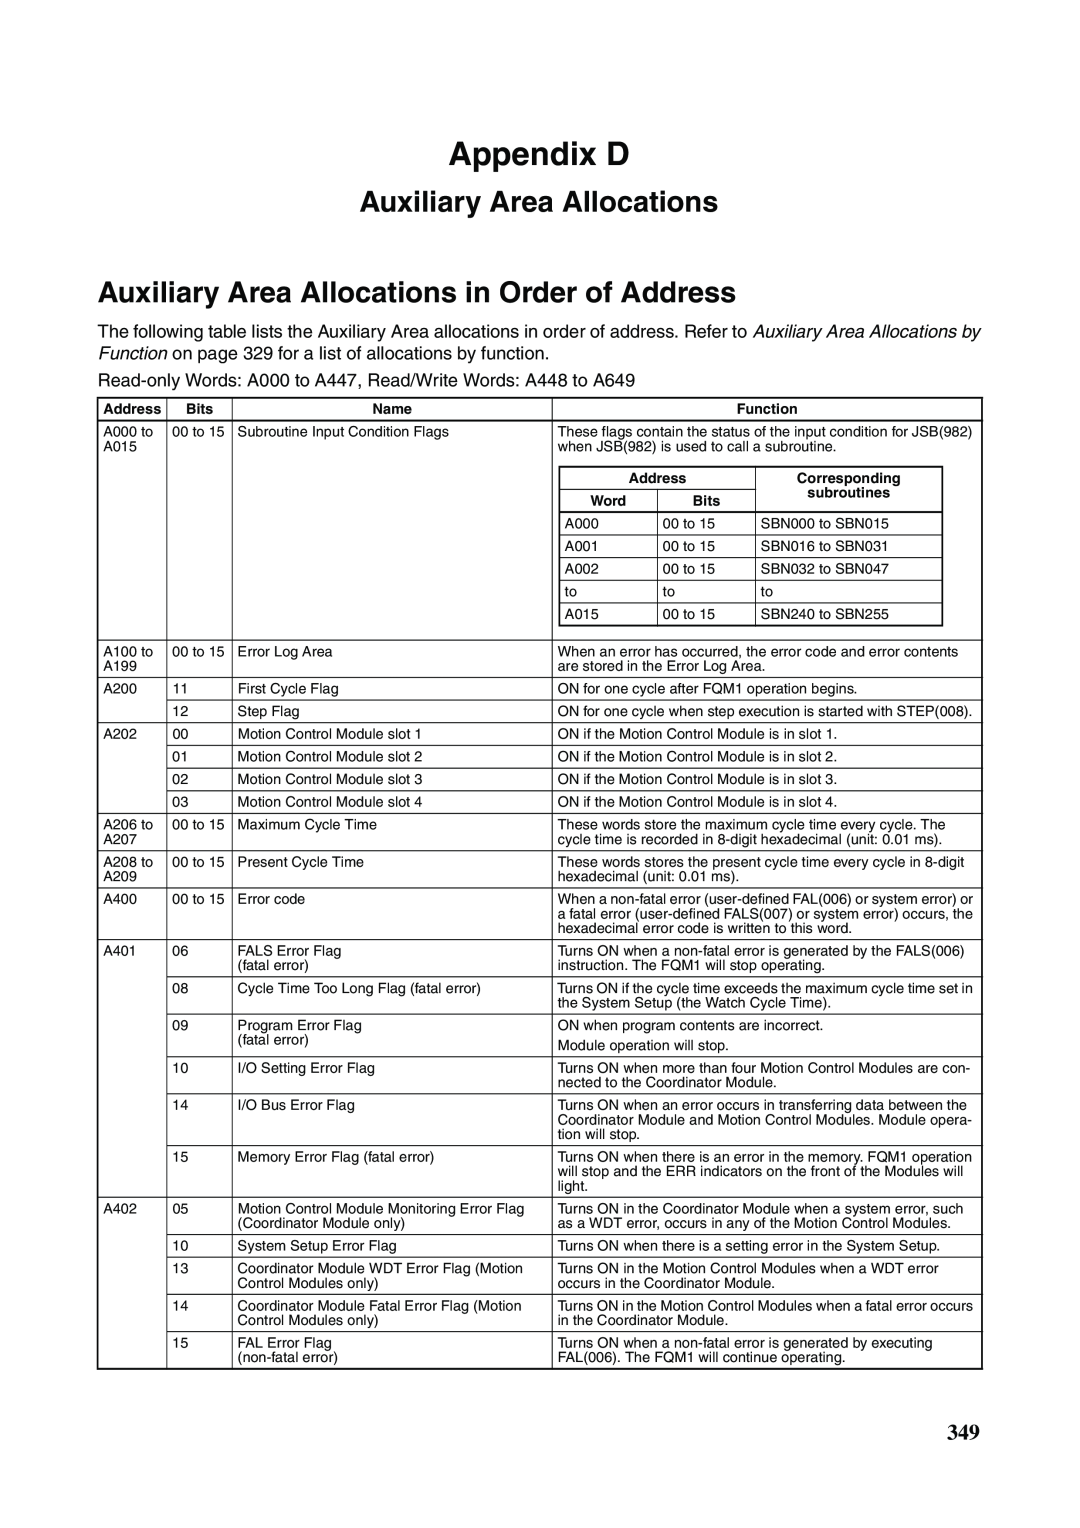 Omron FQM1-CM001, FQM1-MMA21, FQM1-MMP21 operation manual Appendix D, Auxiliary Area Allocations in Order of Address 